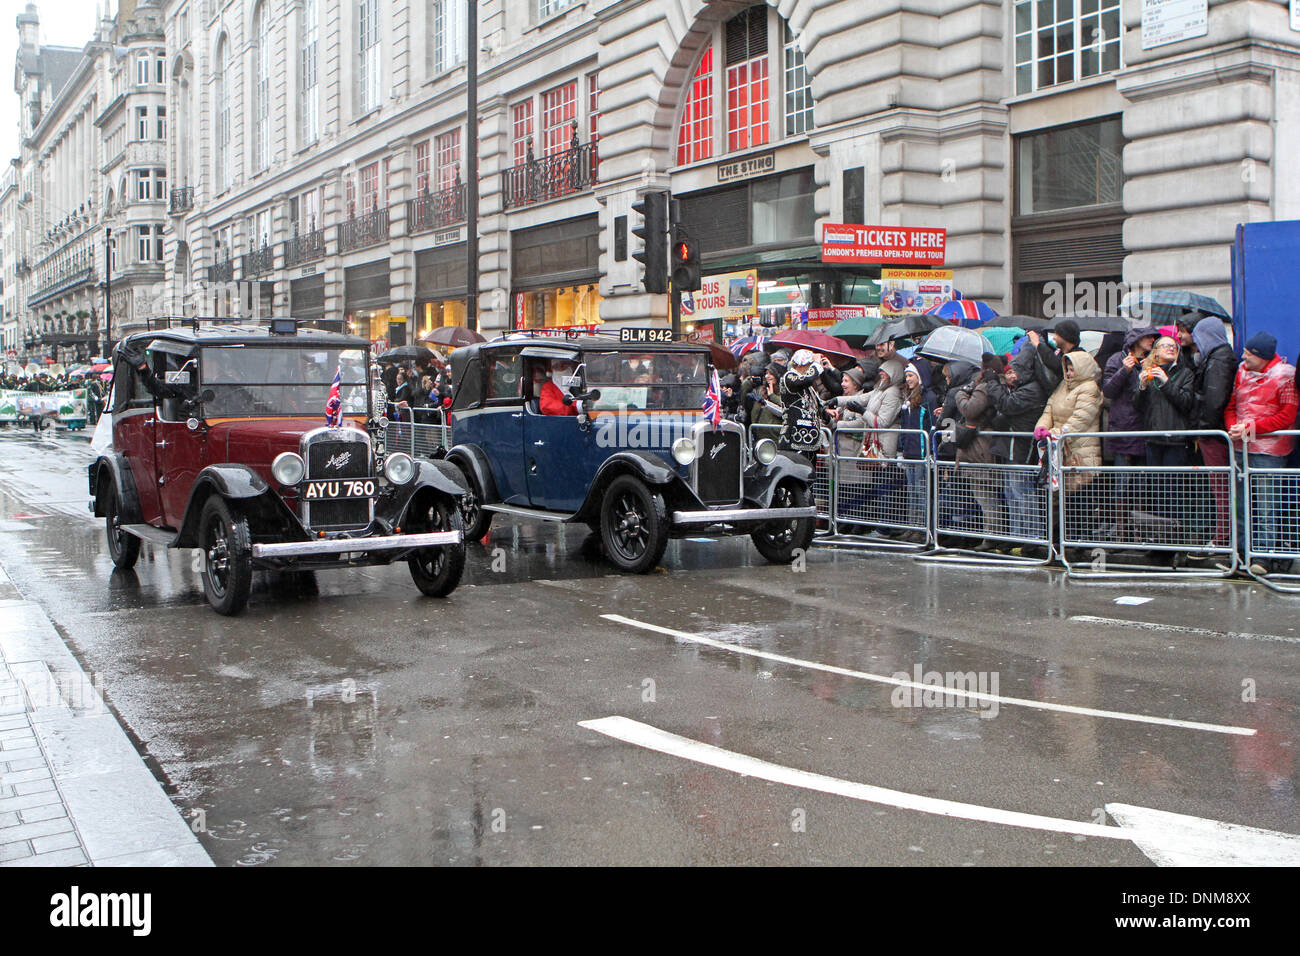 London, UK, 1. Januar 2014, Oldtimer beteiligte sich an der Londoner New Year's Day Parade 2014 Credit: Keith Larby/Alamy Live News Stockfoto